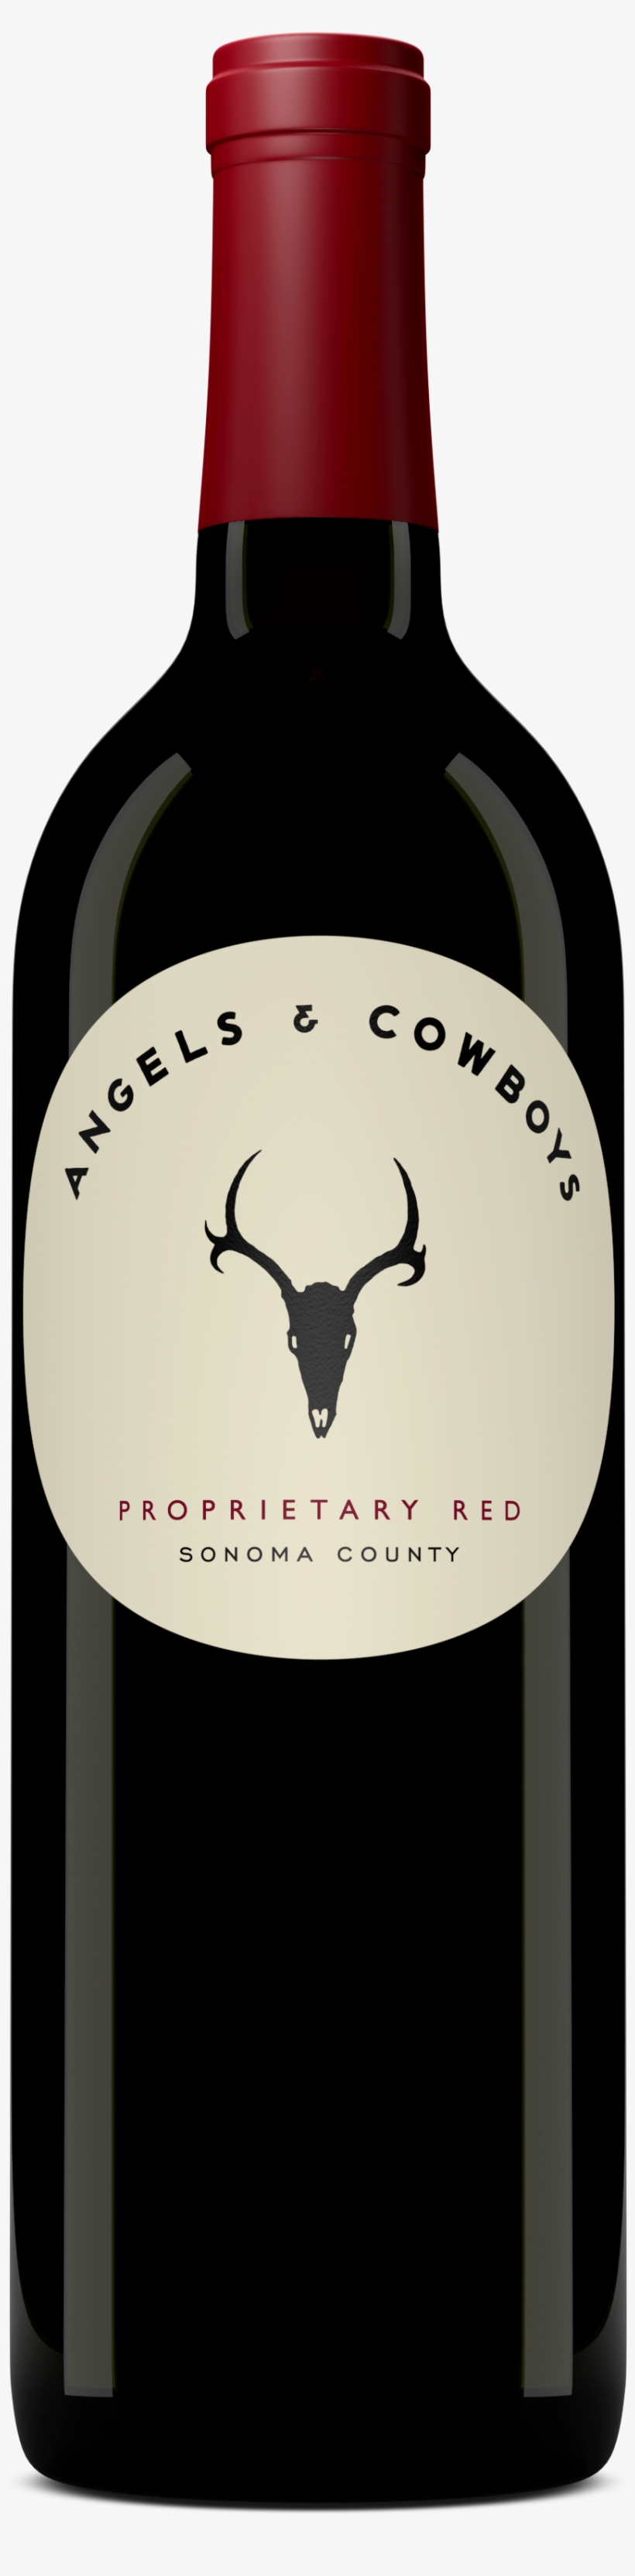 Angels And Cowboys Proprietary Red 2015, transparent png #779694